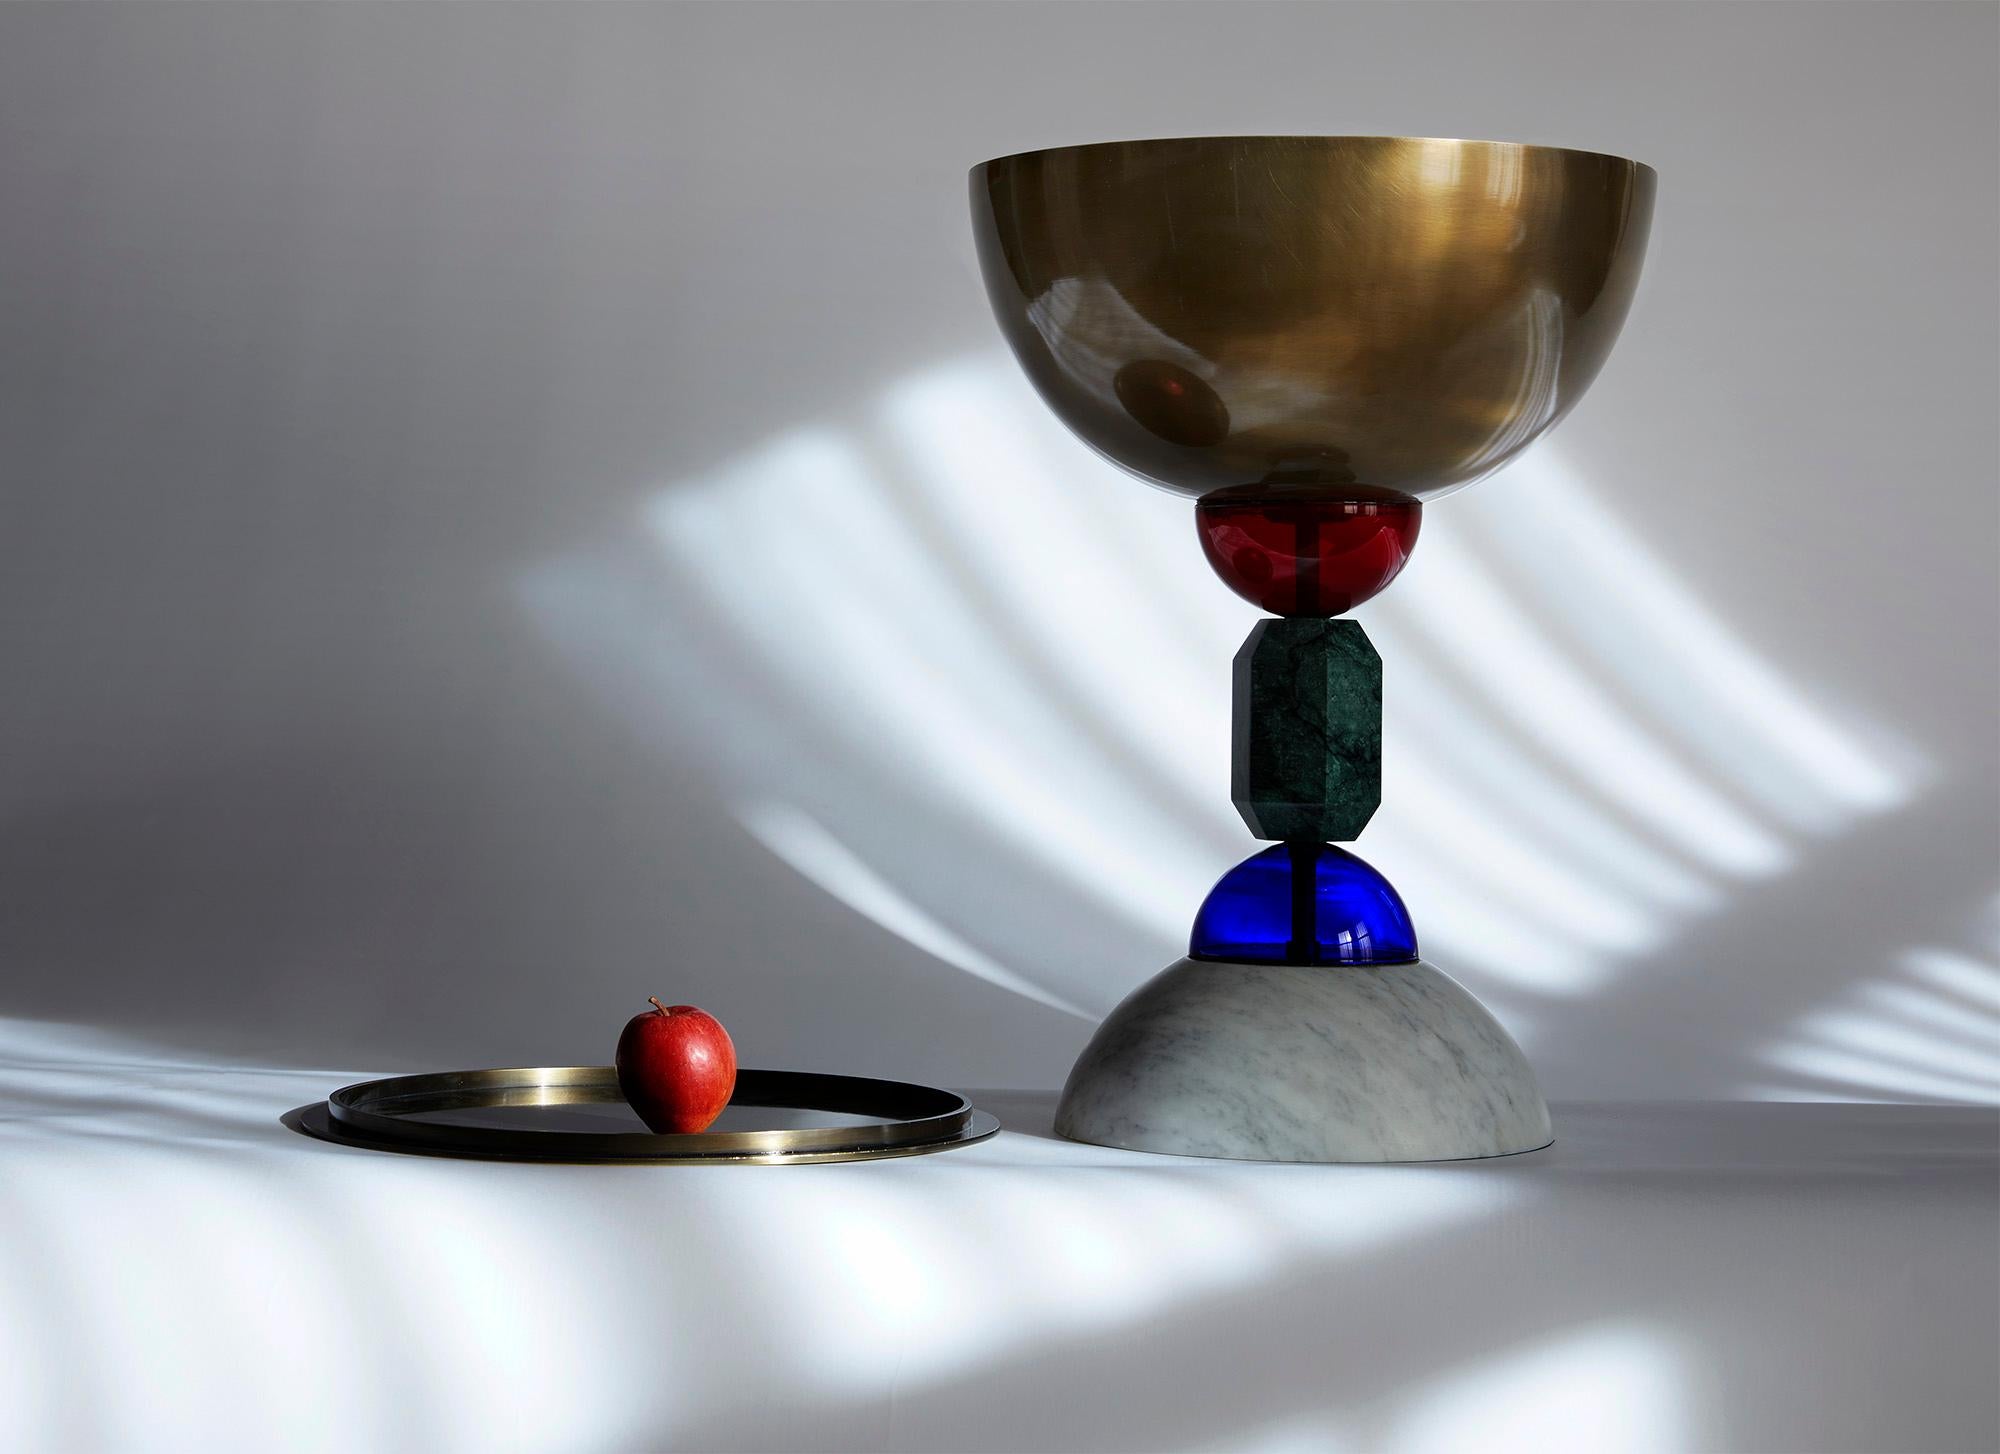 Contemporary Handcrafted Chalice, Pop Art Sculptural Vessel by BelBar Studio 

Happy Grail Chalice is a vessel sculpture with a large bowl in brass, supported by a multi-coloured stem in ruby and sapphire coloured glass, Guatemala and Carrara bianco